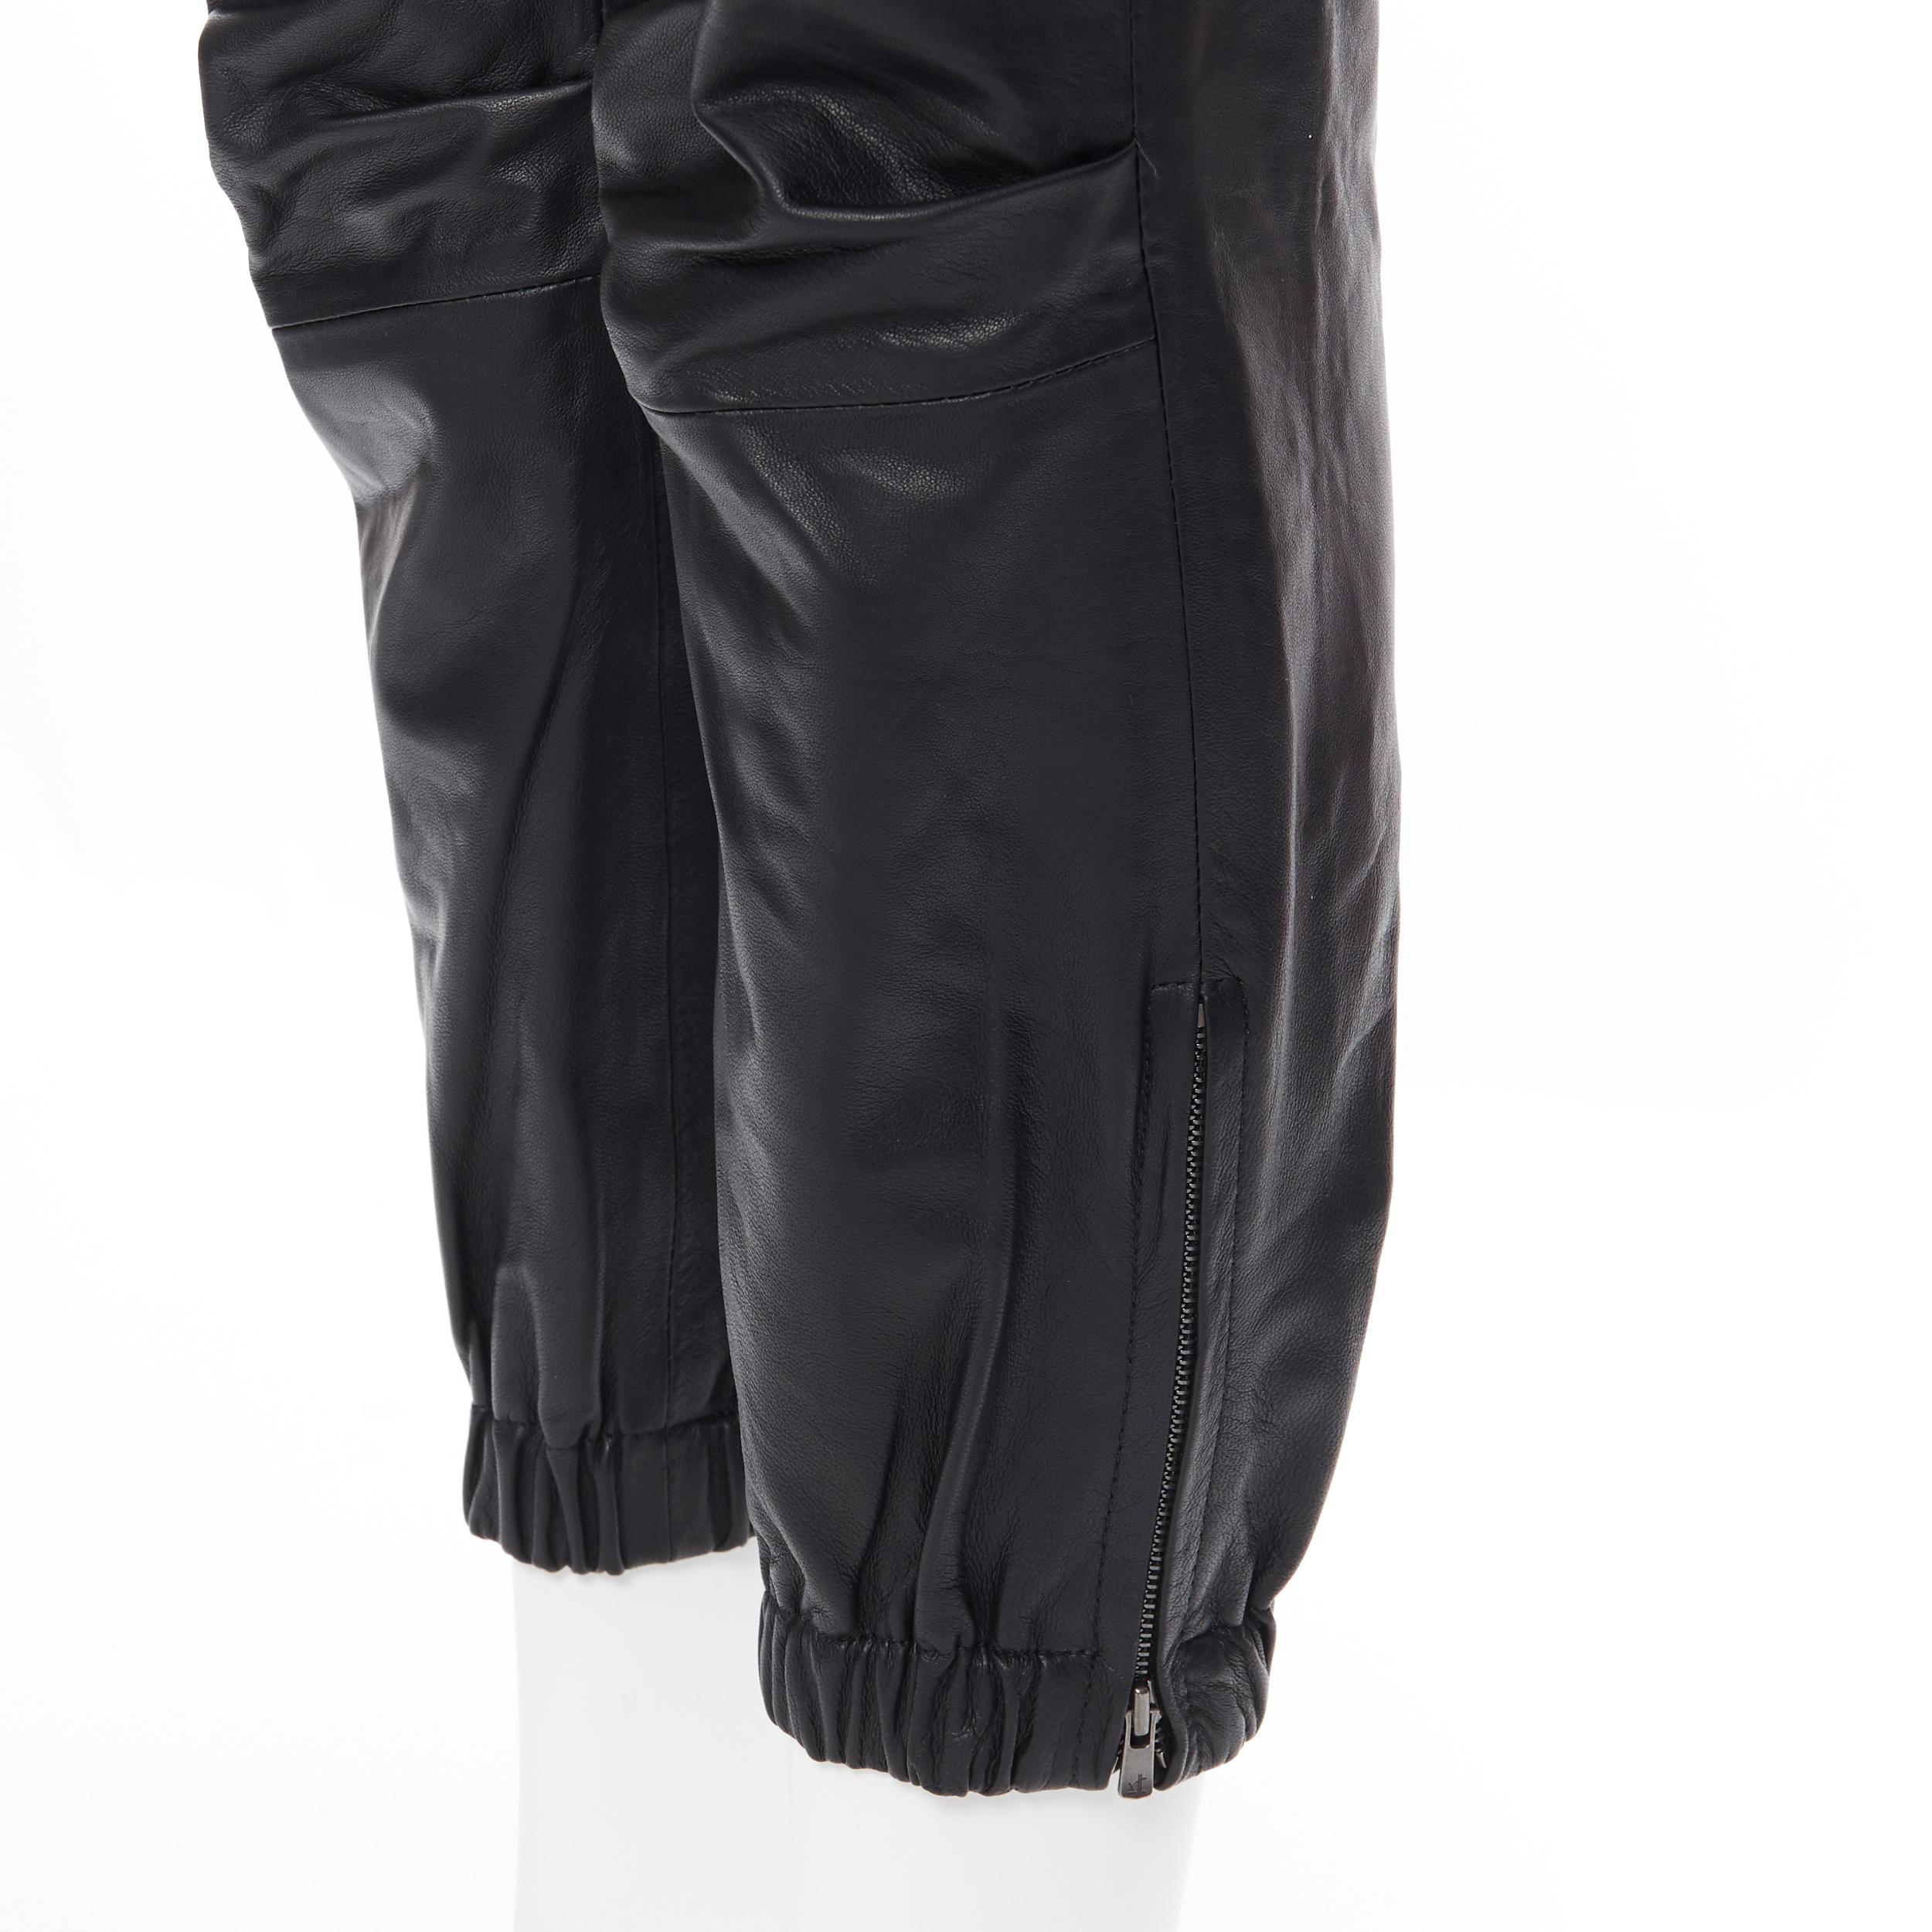 NILI LOTAN 100% lambskin leather elasticated cuff hem casual pants US0 XS
Brand: Nili Lotan
Model Name / Style: Leather pants
Material: Leather
Color: Black
Pattern: Solid
Extra Detail: Button fly closure. 4-pocket design. Elasticated cuff hem with